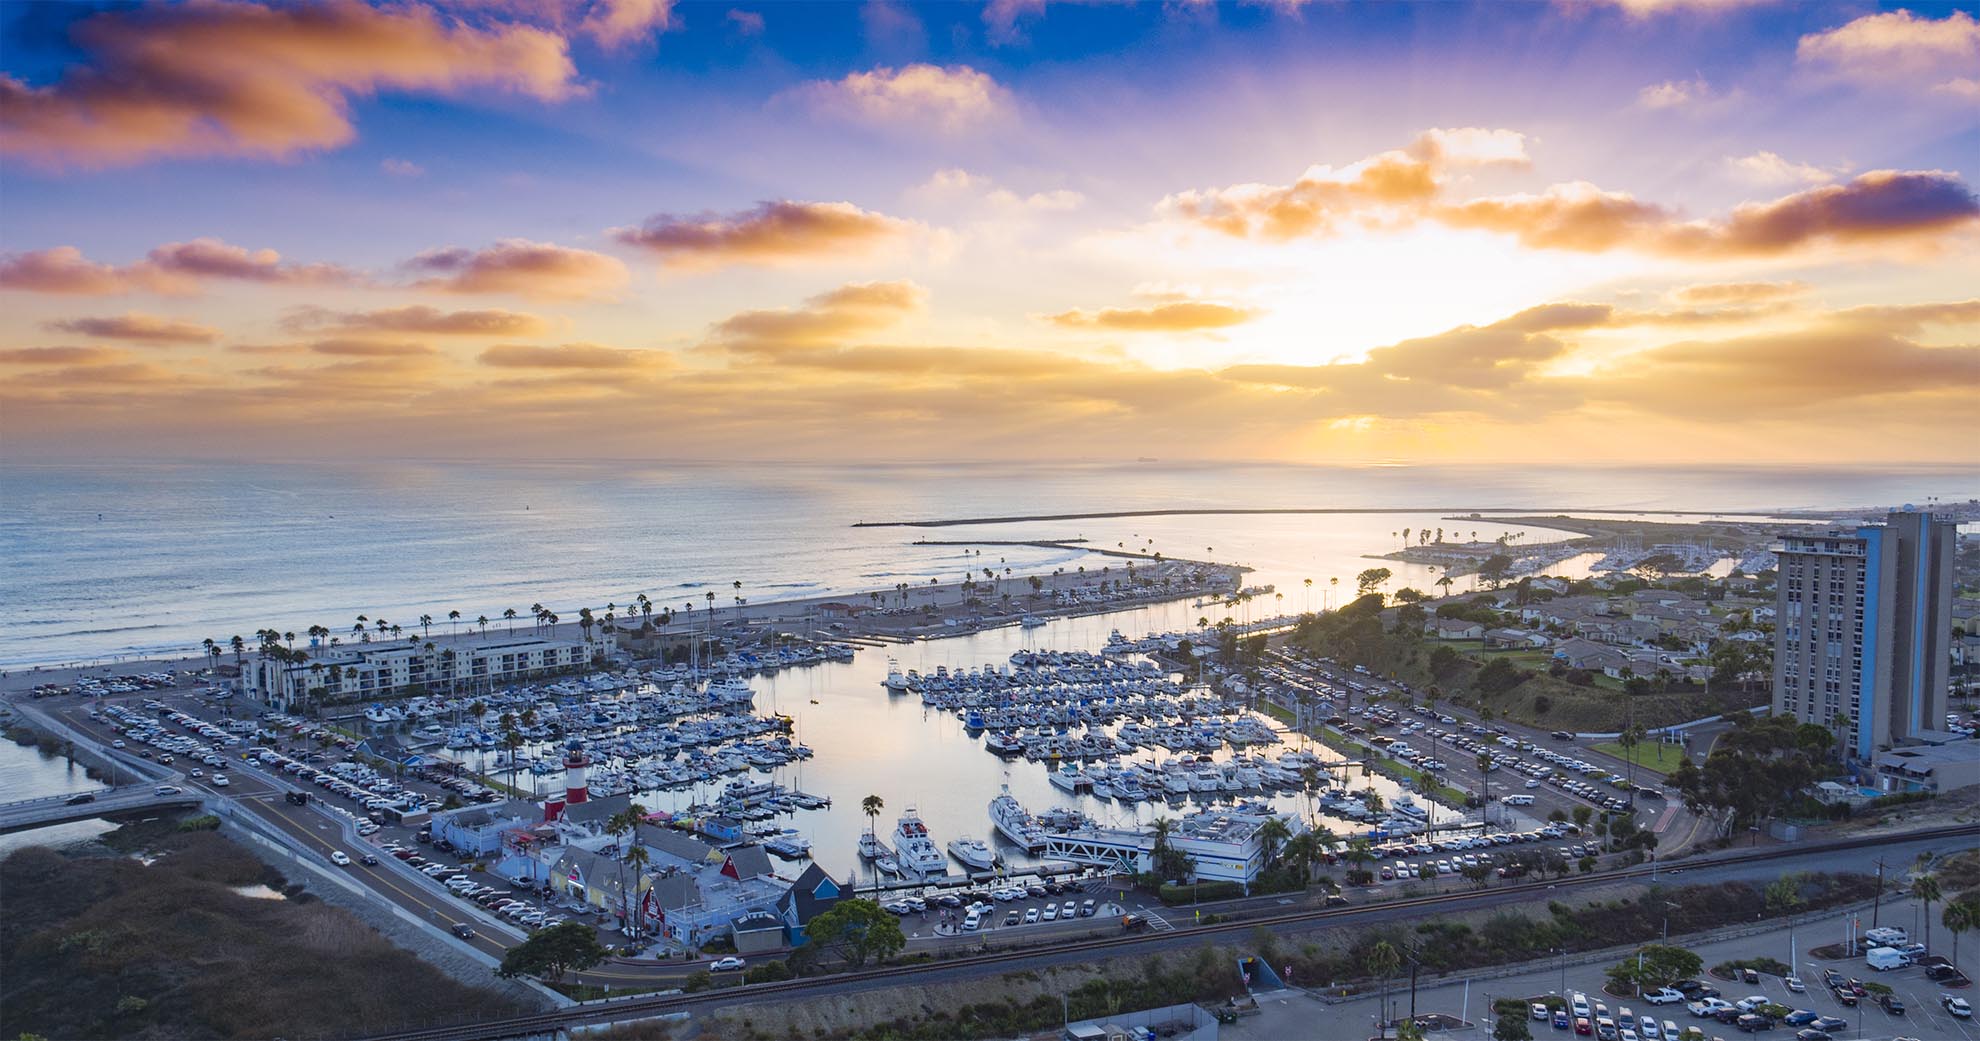 Drone photograph of Oceanside Harbor at sunset